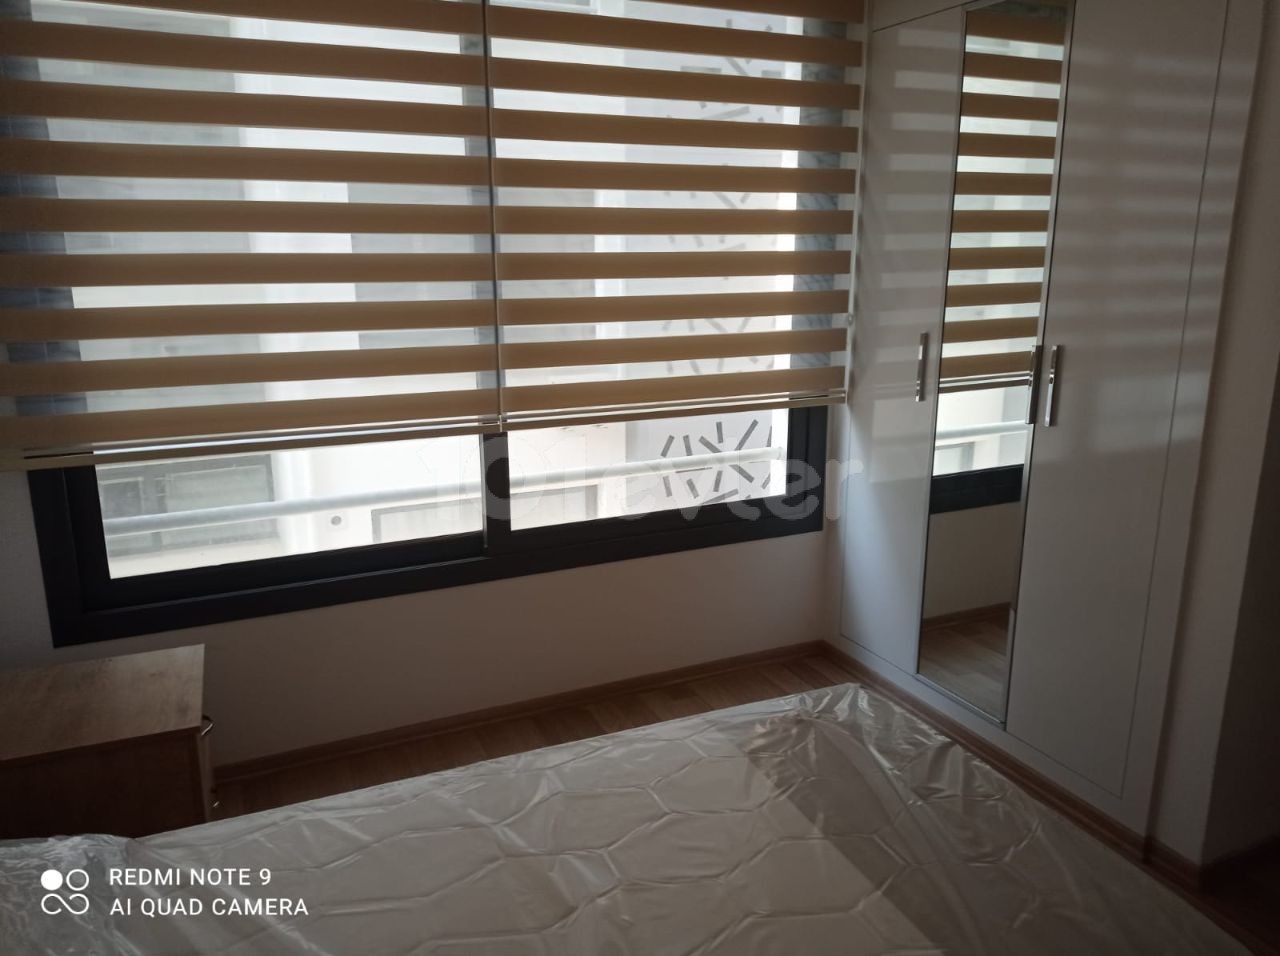 A PERFECT (2 + 1) APARTMENT FOR RENT WITH ZERO FURNITURE IN A NEW ELEVATOR BUILDING IN ORTAKENT, WITHIN WALKING DISTANCE OF DEREBOYUN AND STOPS ** 